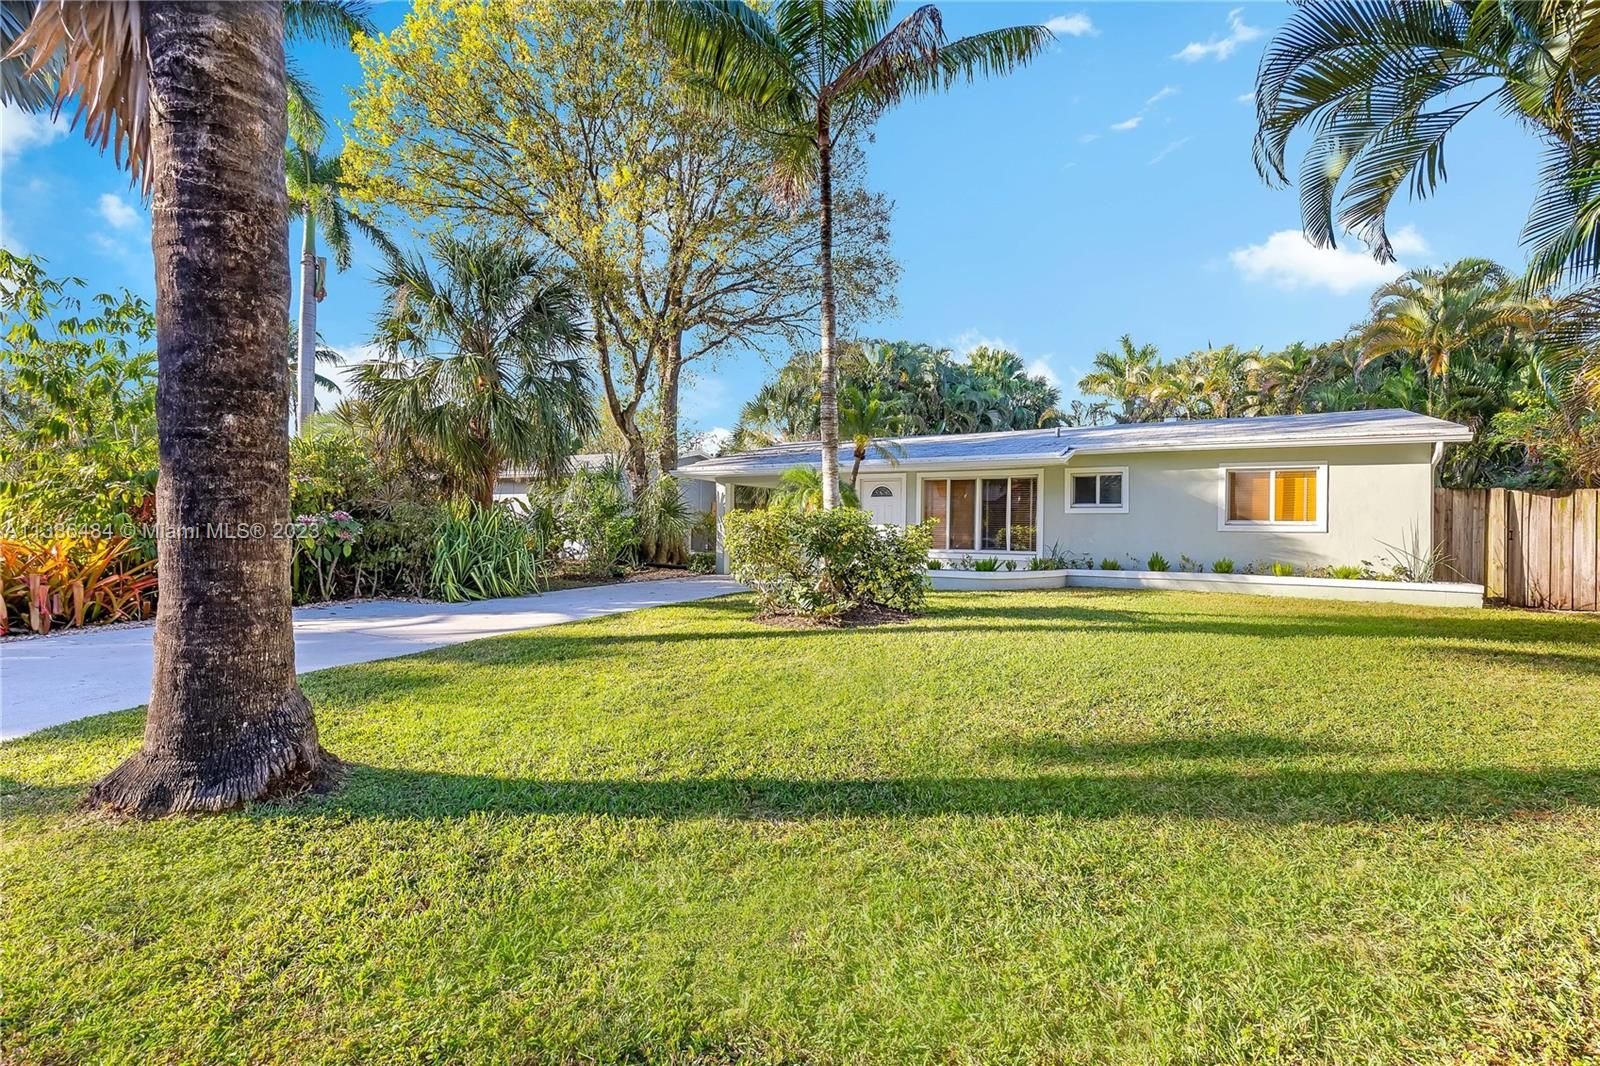 Real estate property located at 325 30th St, Broward County, Wilton Manors, FL